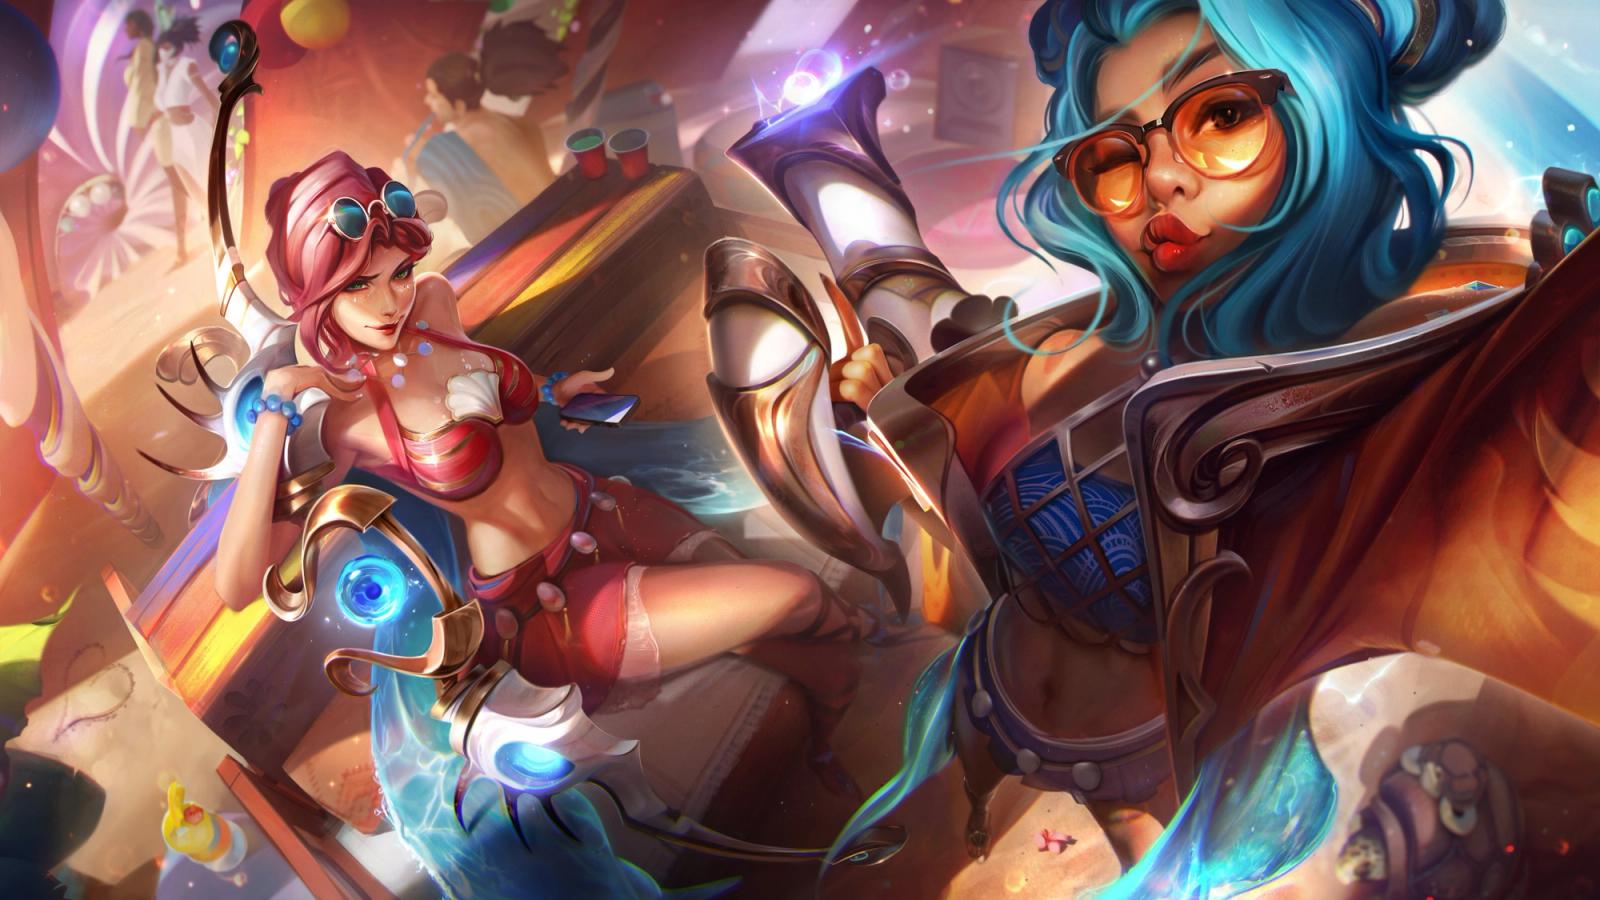 LoL 12.11: Patch Notes, Release Date, Bel'Veth Release & Latest News - 
Ocean Song Ashe and Zeri